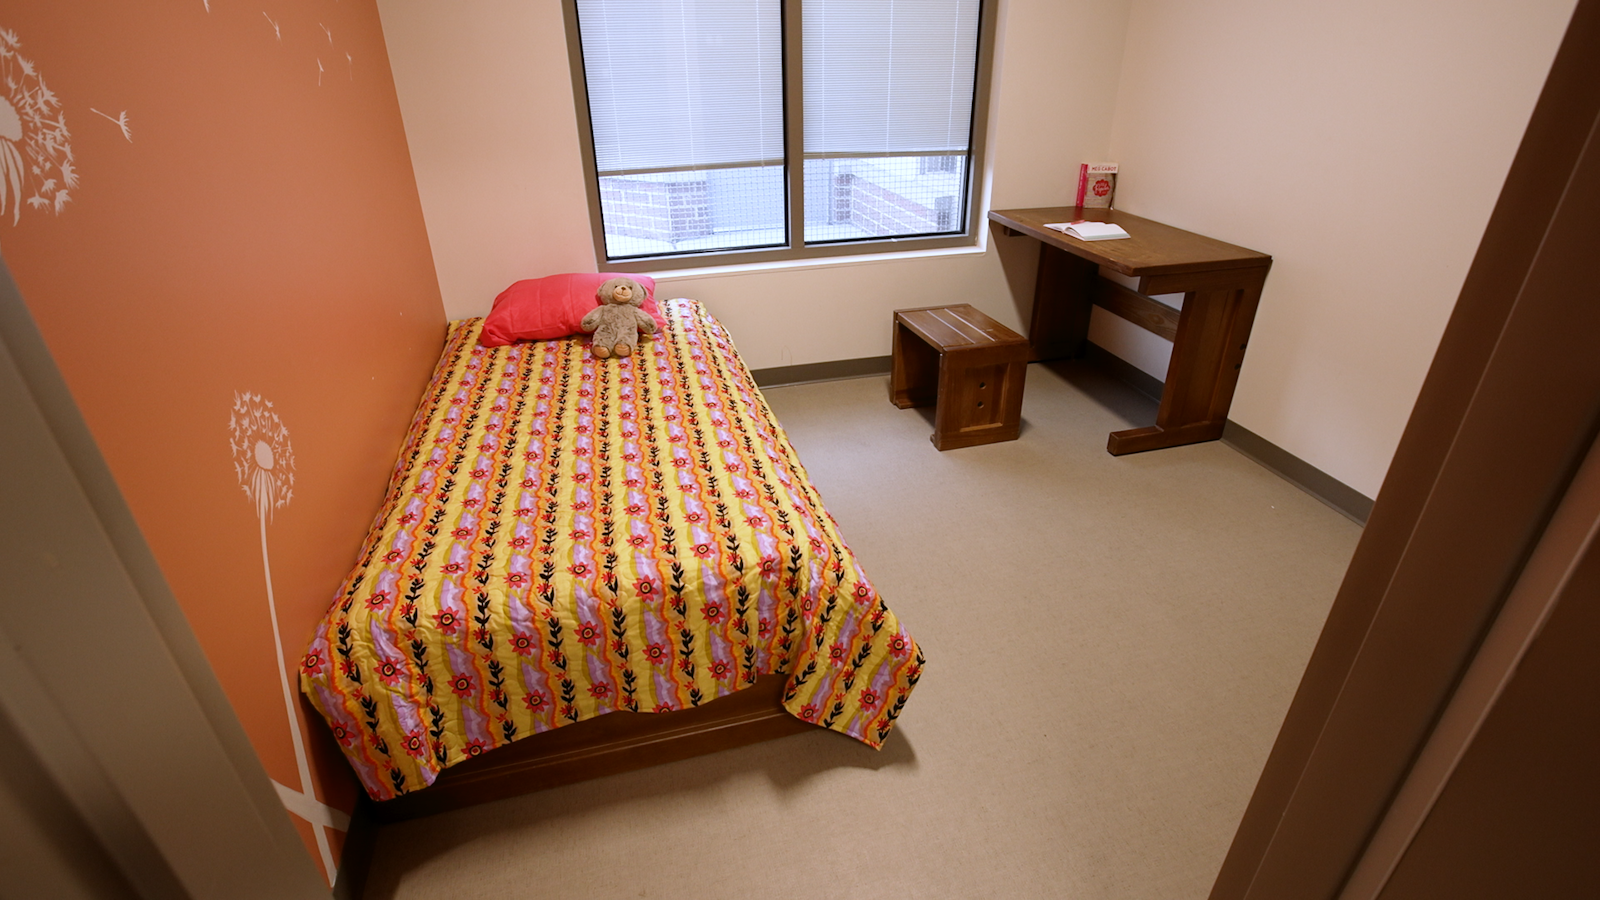 A typical room for girls who are in the residential mental health treatment program.